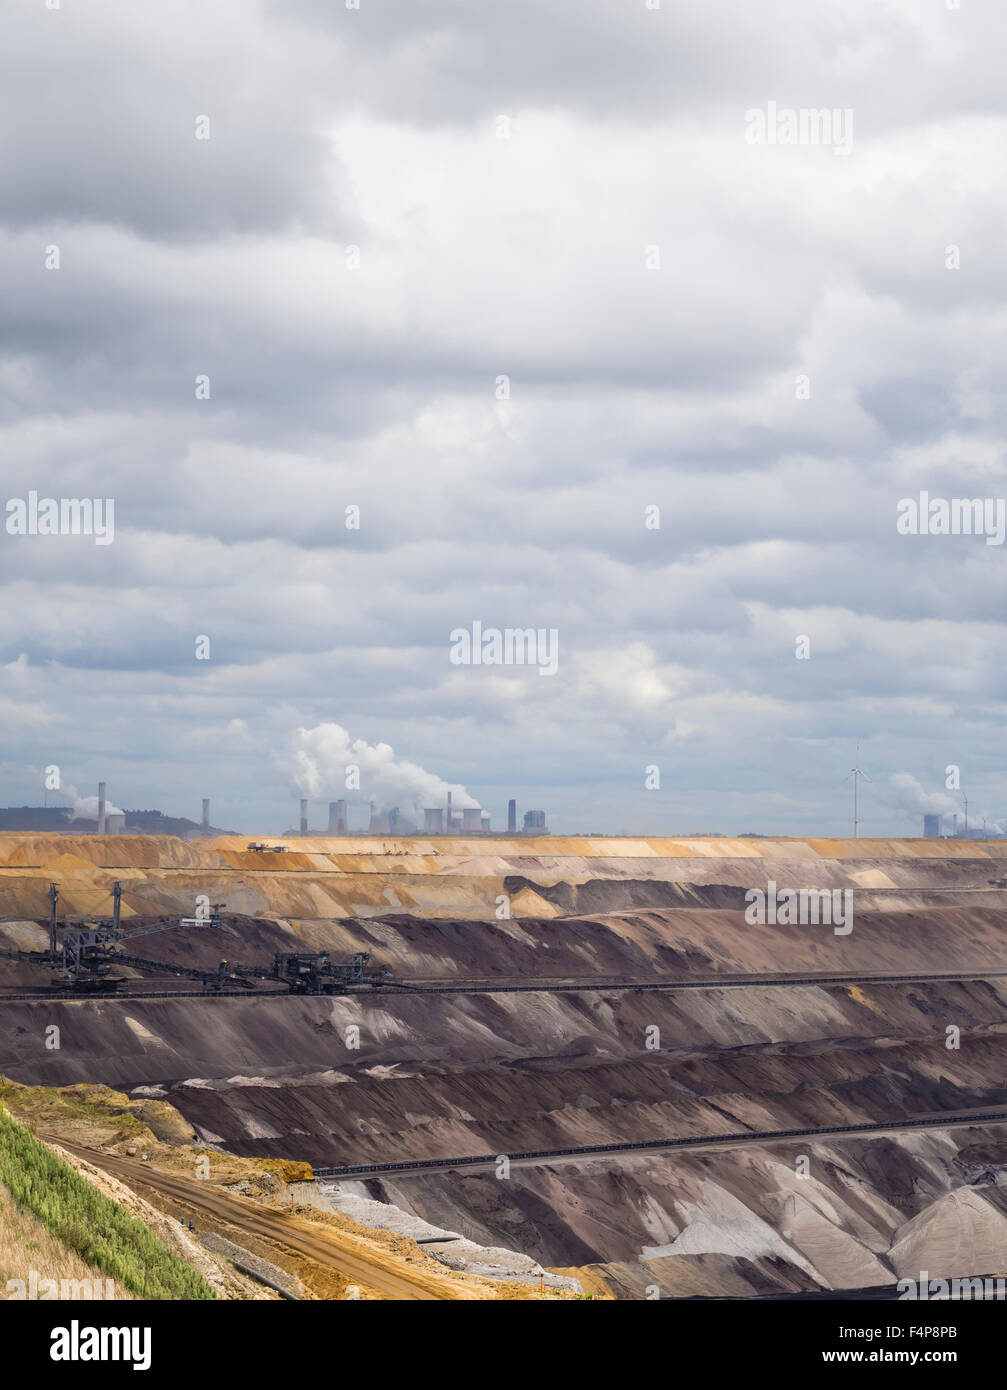 Cratered landscape of the surface mining field at Garzweiler, Germany's largest opencast pit for lignite extraction. Stock Photo